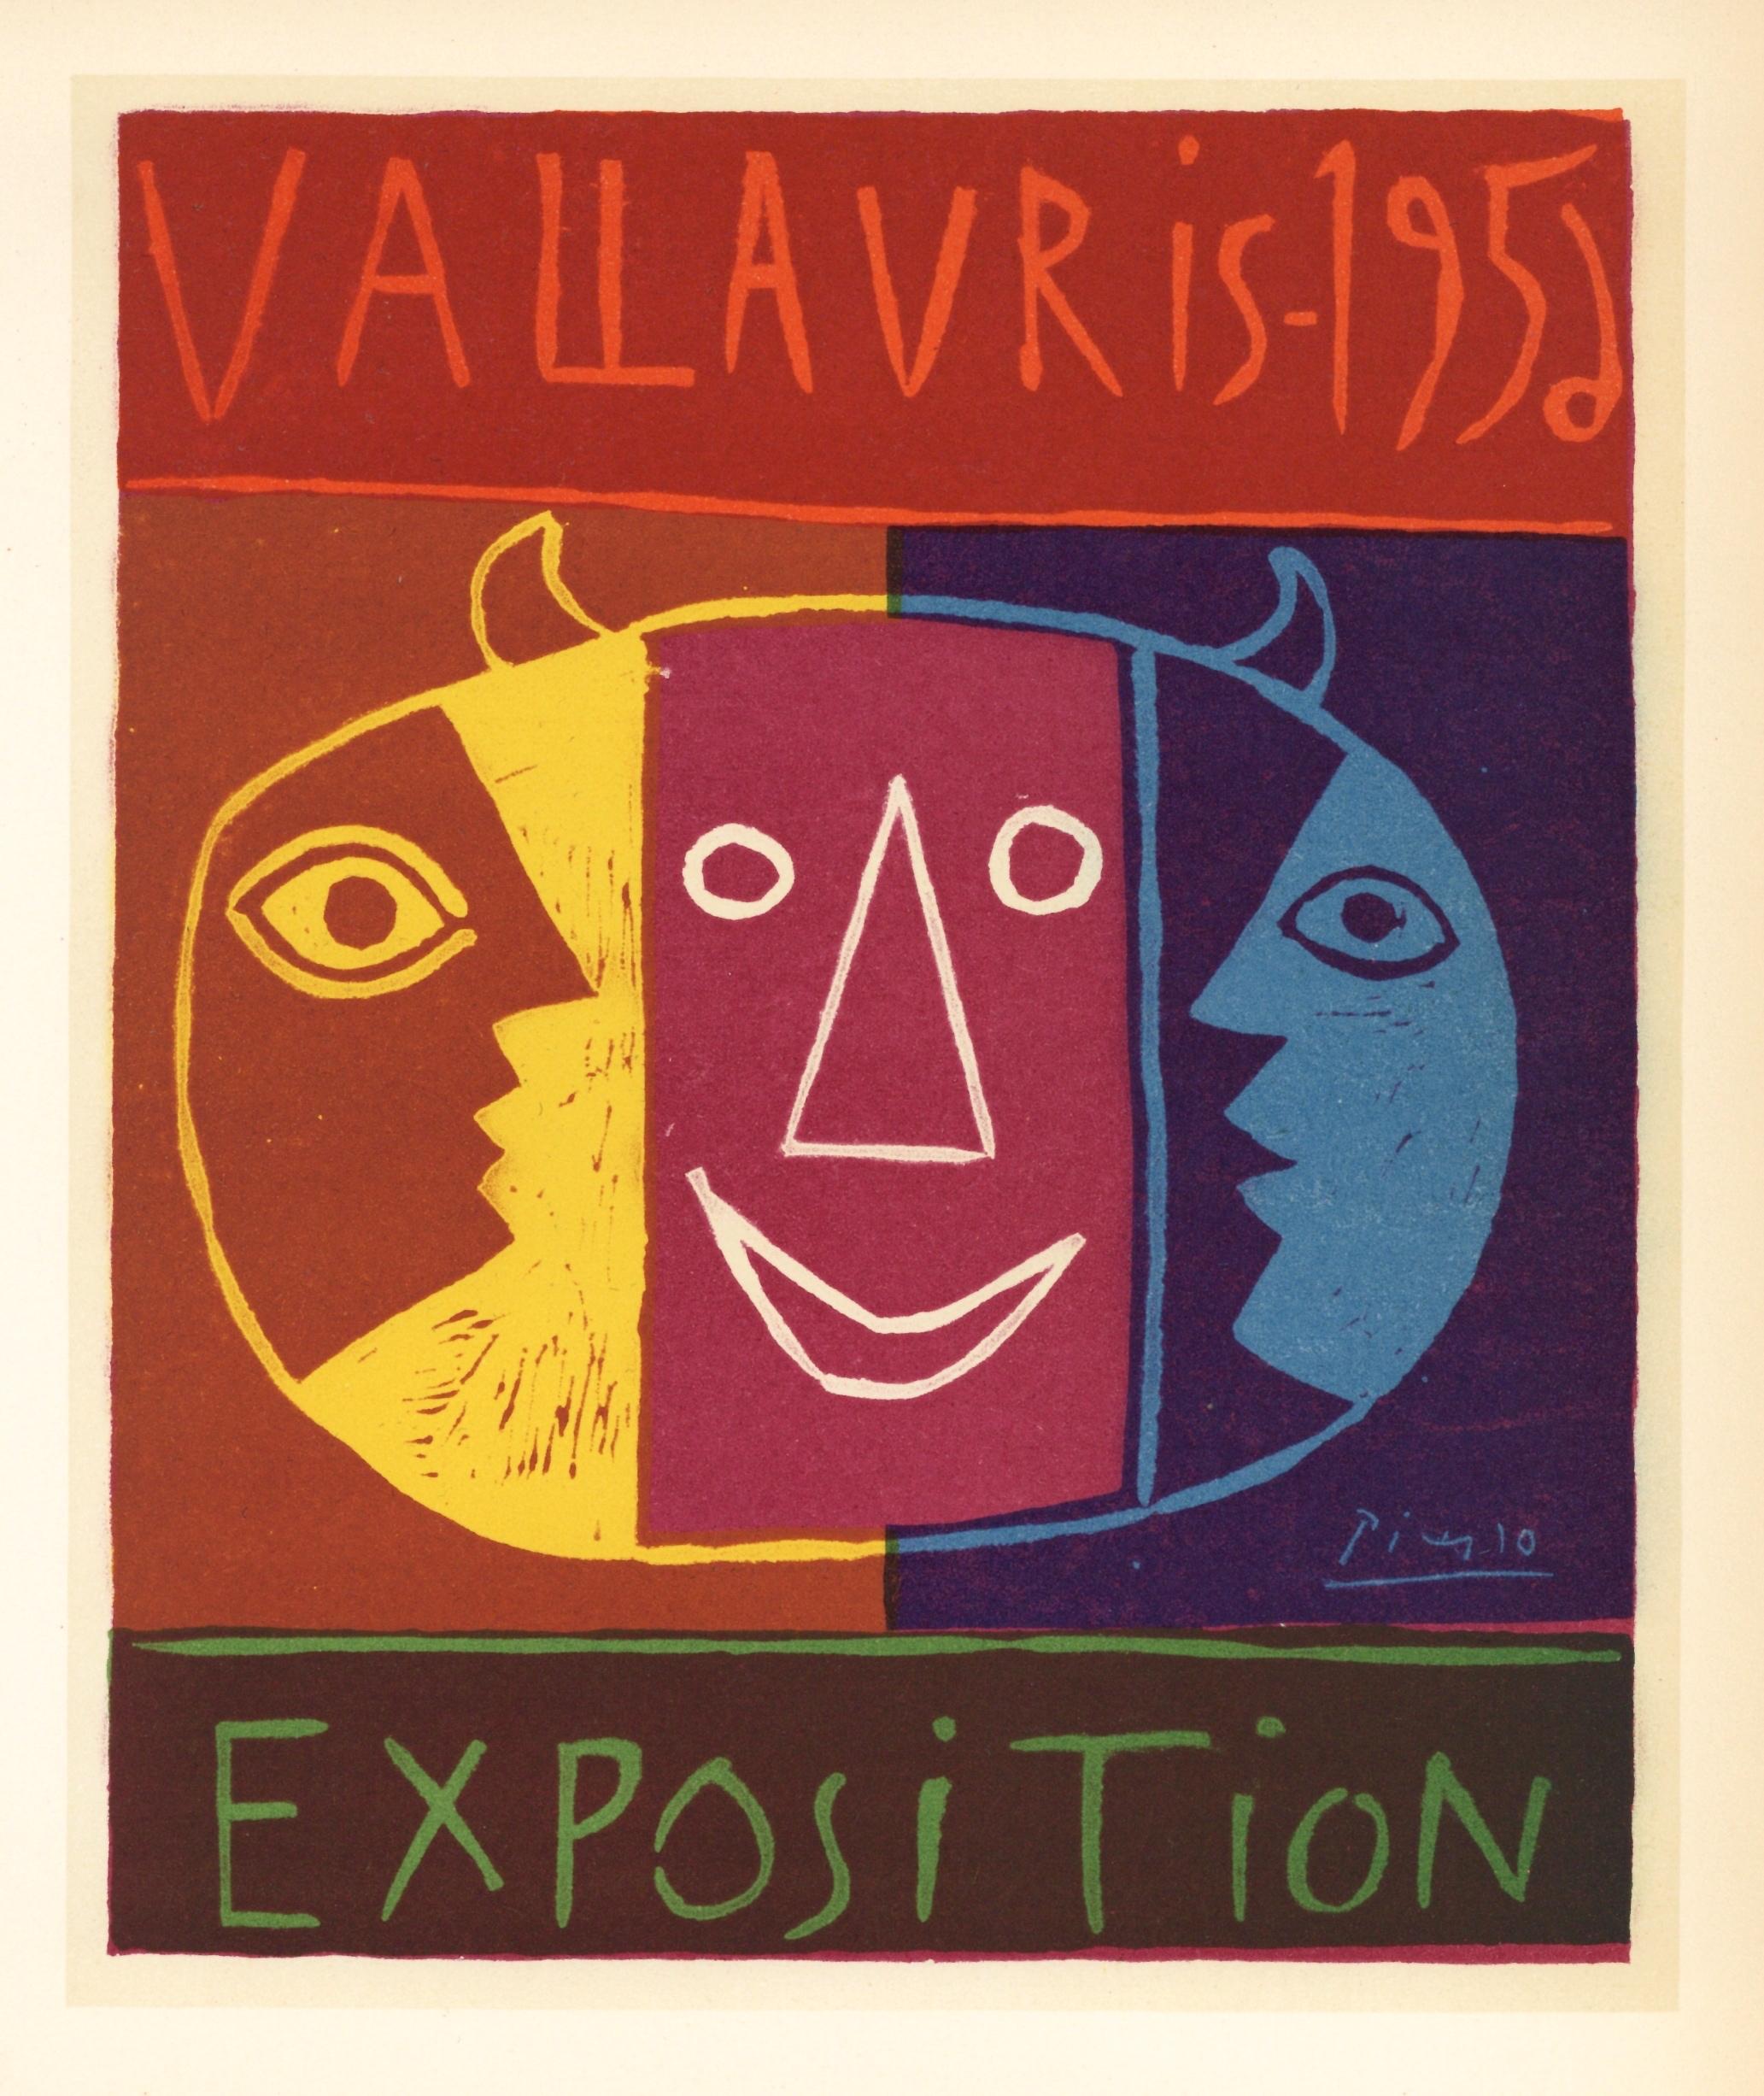 "Exposition Vallauris" lithograph poster - Print by (after) Pablo Picasso